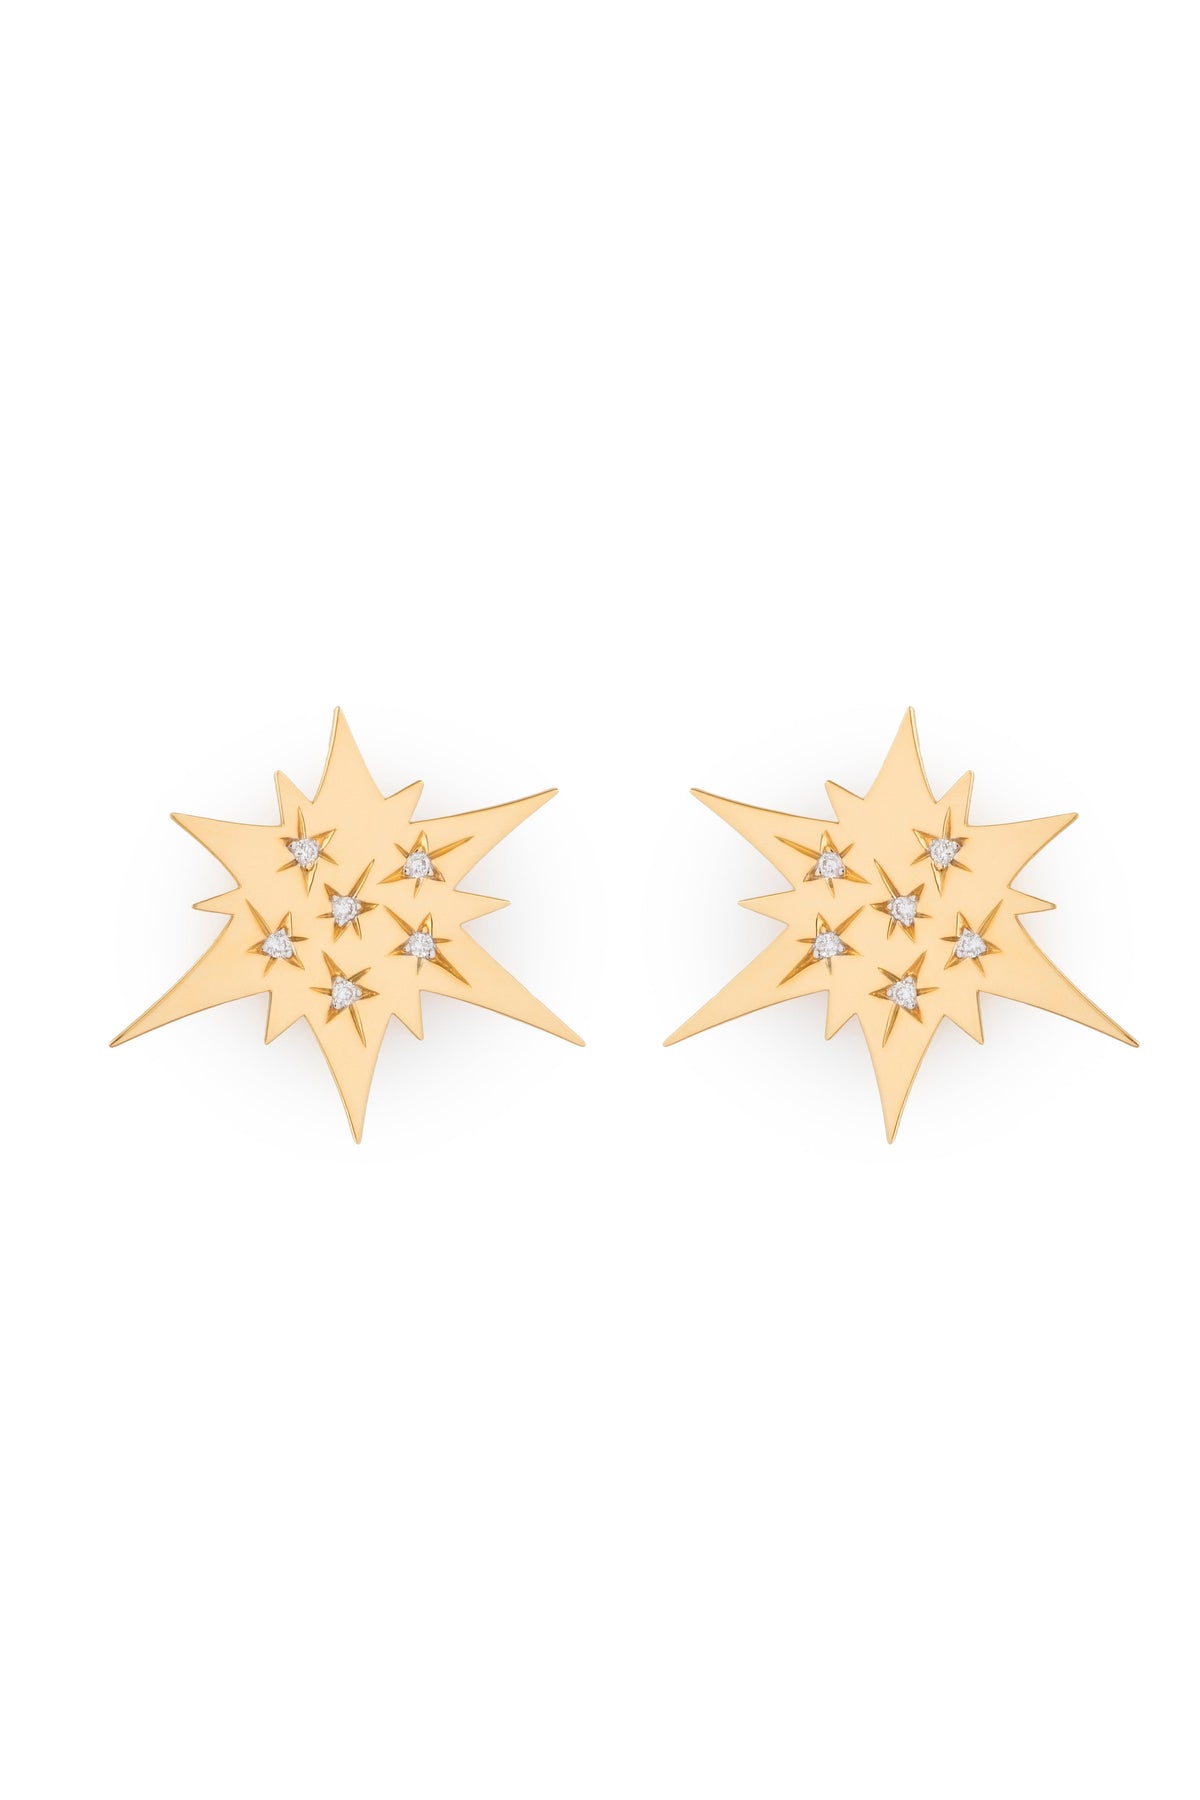 Soleil Collection Earrings Yellow Gold with White Diamonds